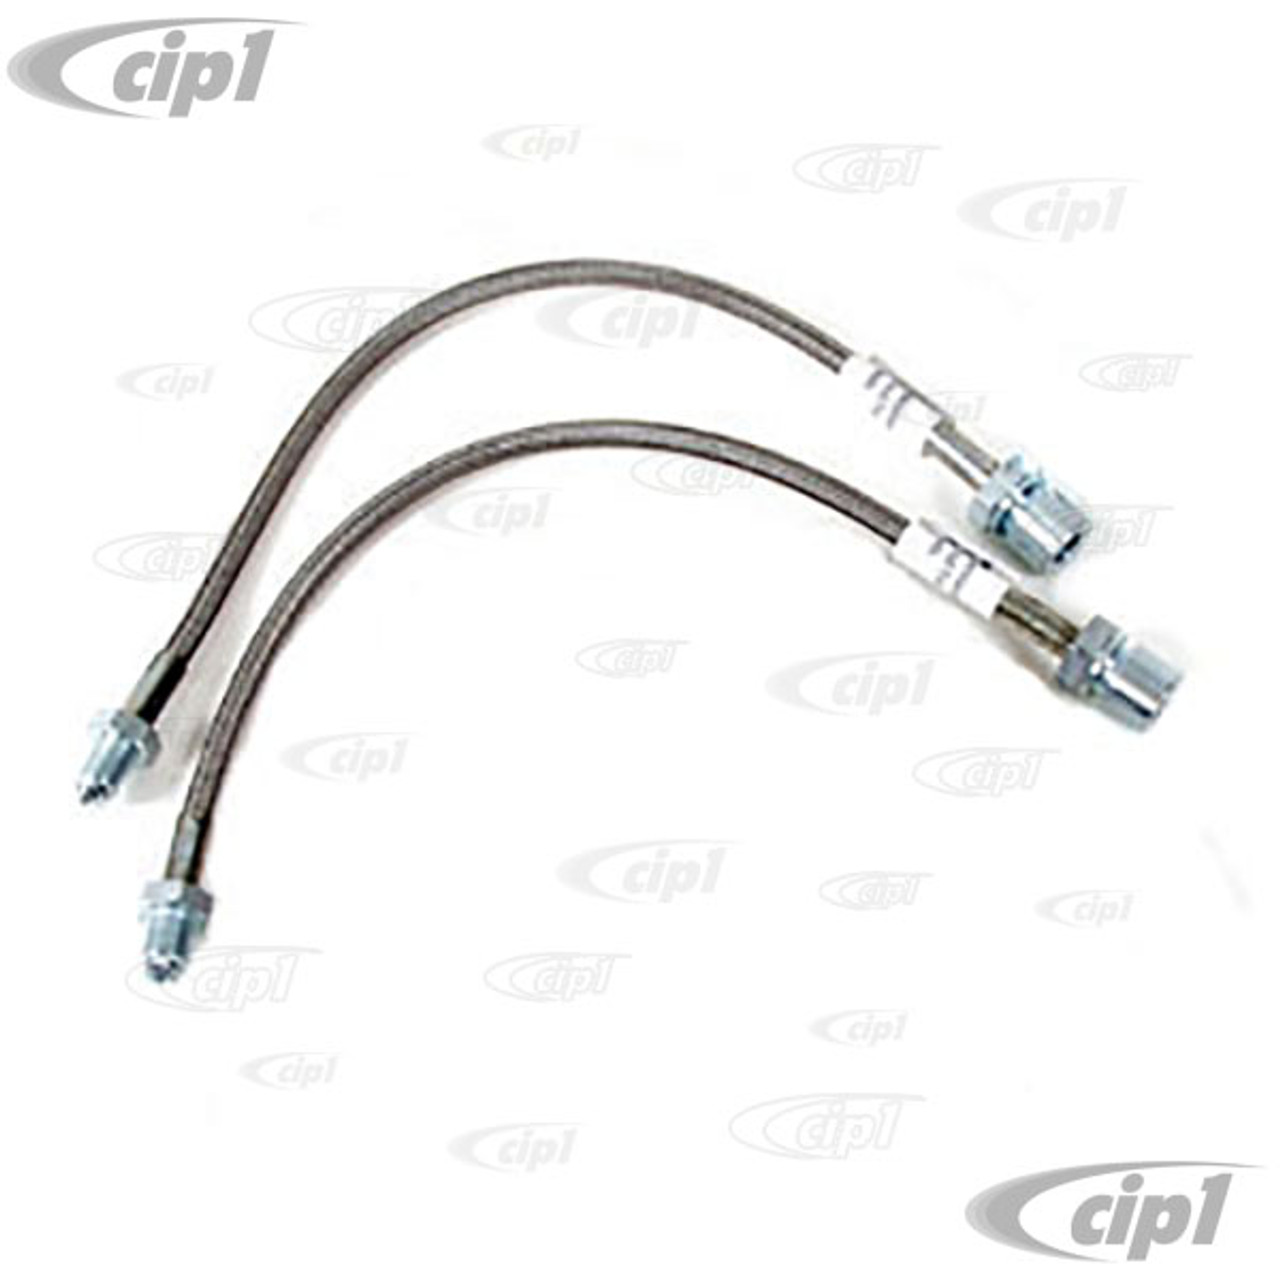 C12-5585-15 - STAINLESS STEEL BRAIDED BRAKE HOSES - 235MM M/F ENDS - REAR  IRS - BEETLE 69-79/GHIA 69-74/TYPE-3 - SOLD PAIR